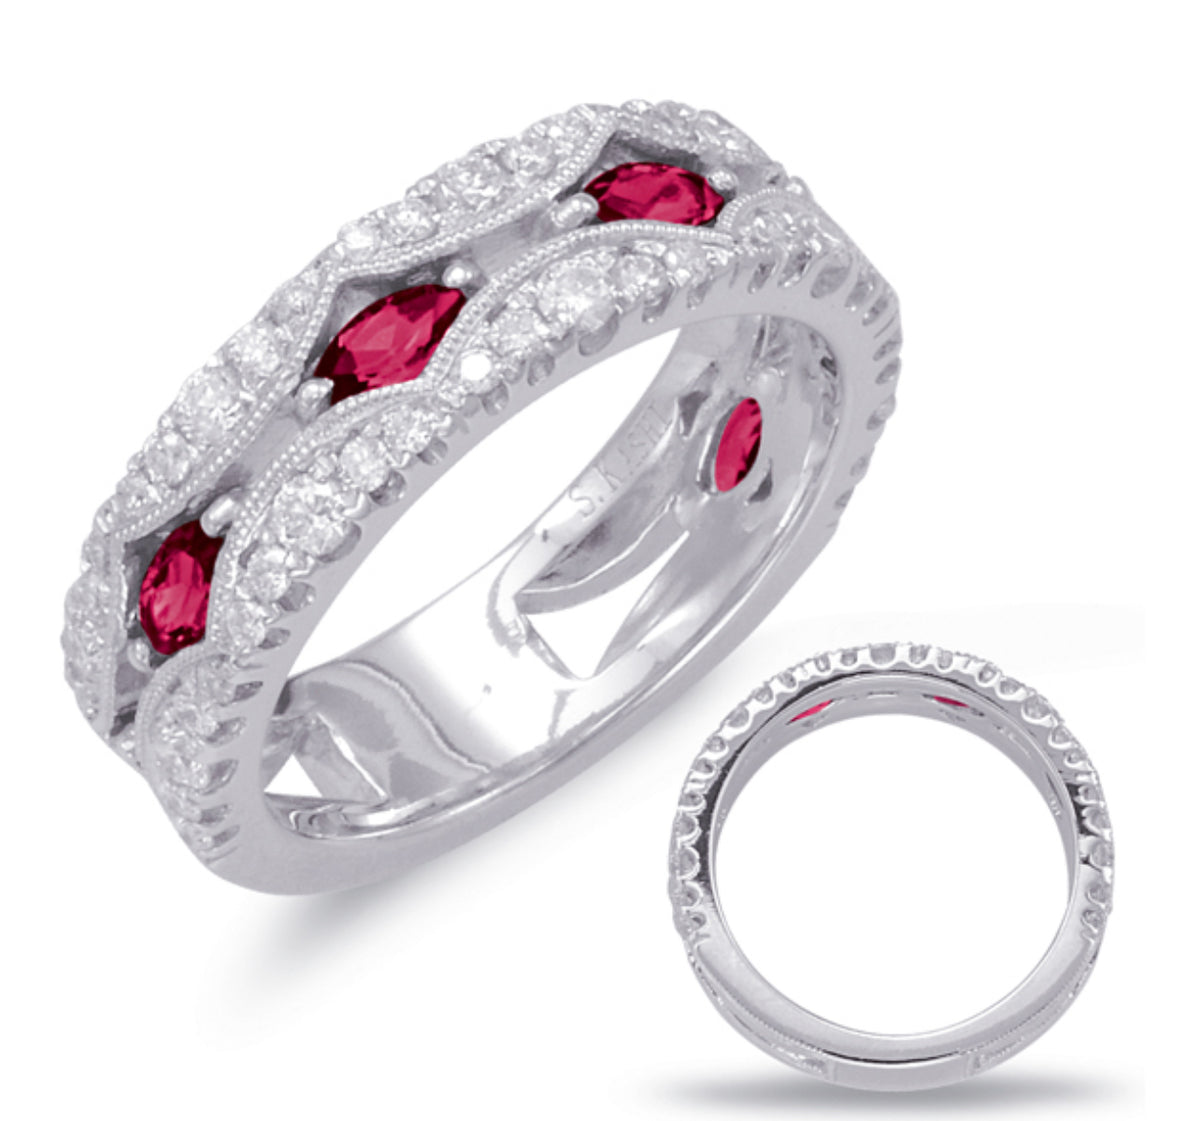 14K White Gold 0.65cttw Ruby and 0.58cttw Diamond Ring - Size 7